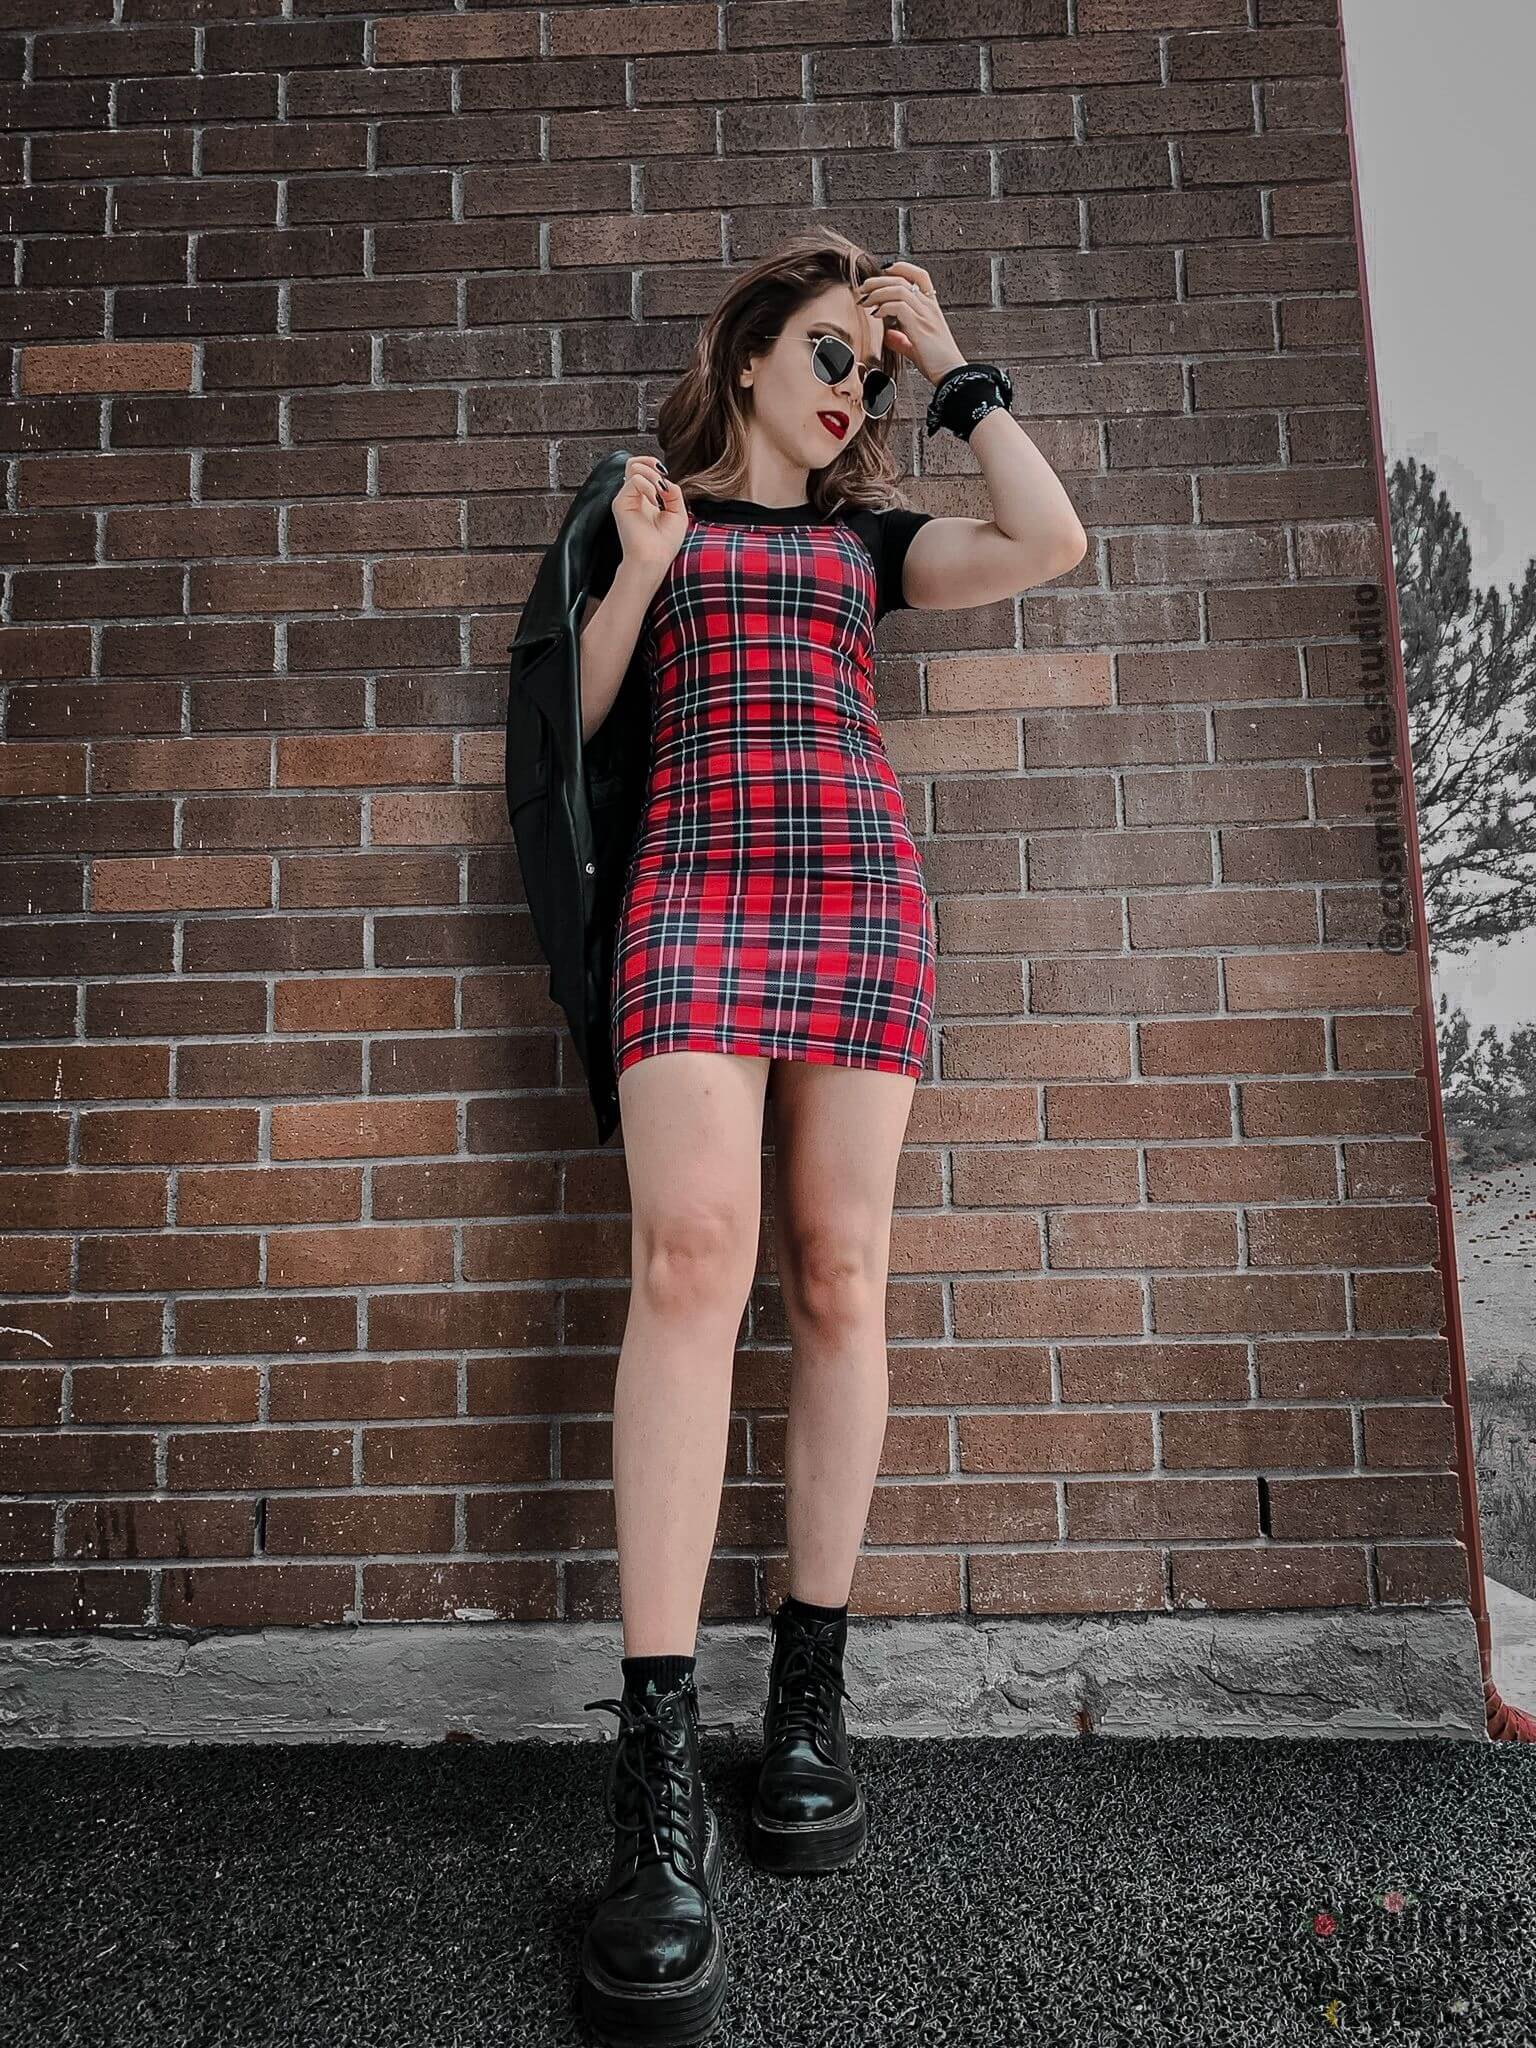 grunge girl on a tile wall, wearing plaid mini red dress combined with black platform boots, black leather jacket on her finger, and black sunglasses